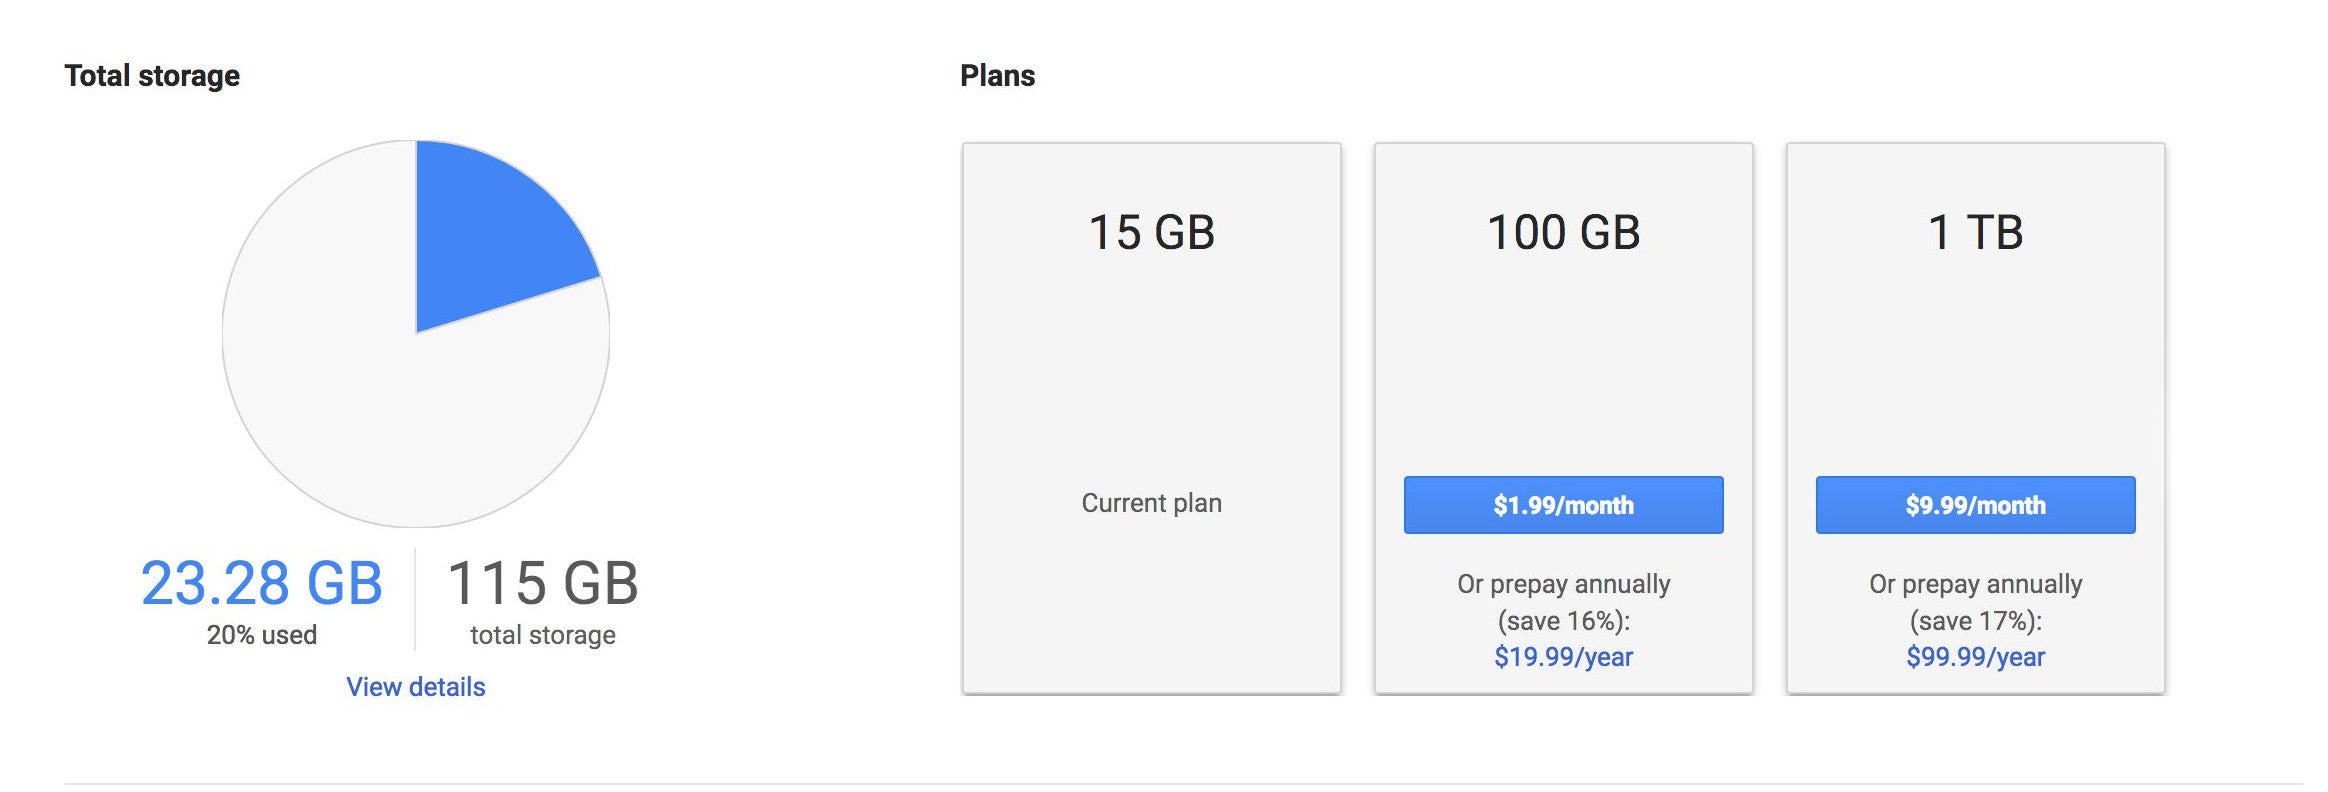 Google Drive now offers discounts for yearly subscribers to its two highest tiers of storage space - Google Drive now offers discounted annual subscriptions for the 100GB and 1TB tiers